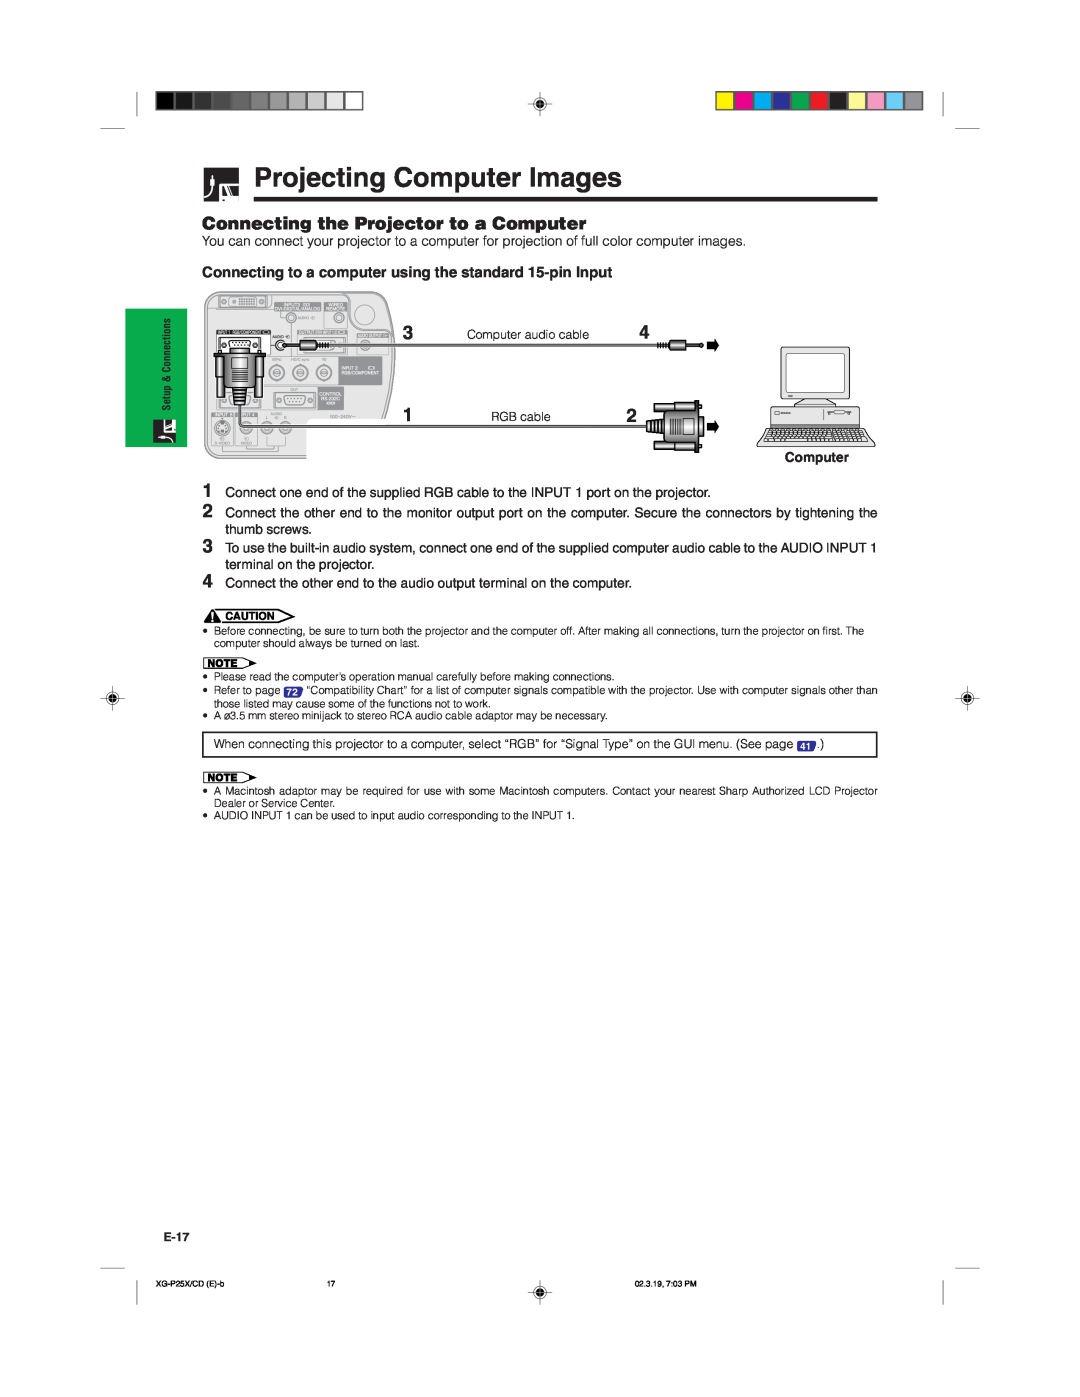 Sharp XG-P25X operation manual Projecting Computer Images, Connecting the Projector to a Computer 